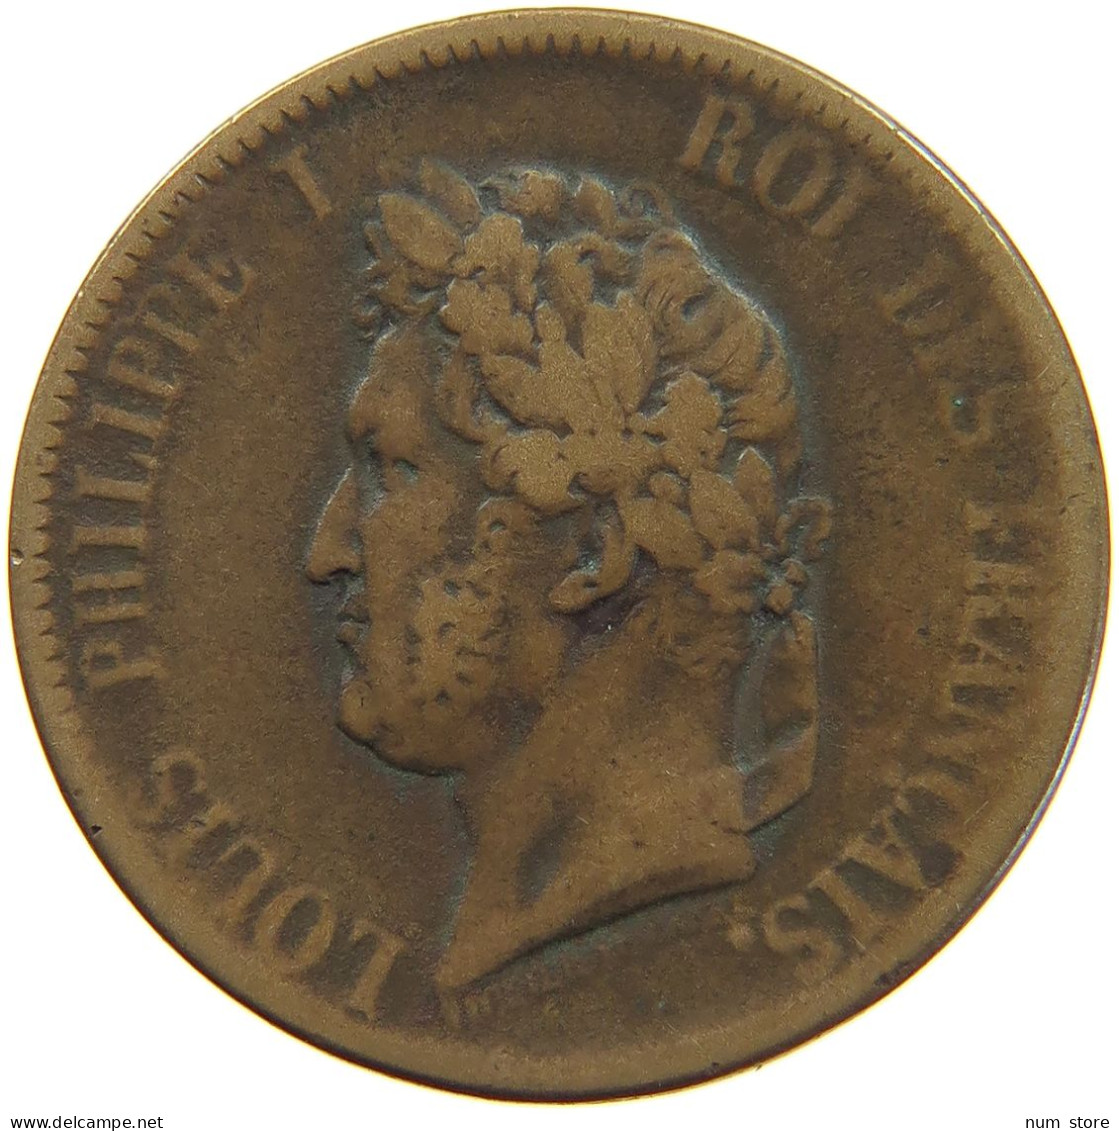 FRENCH COLONIES 5 CENTIMES 1839 A LOUIS PHILIPPE I. (1830-1848) #c061 0061 - Colonie Francesi (1817-1844)